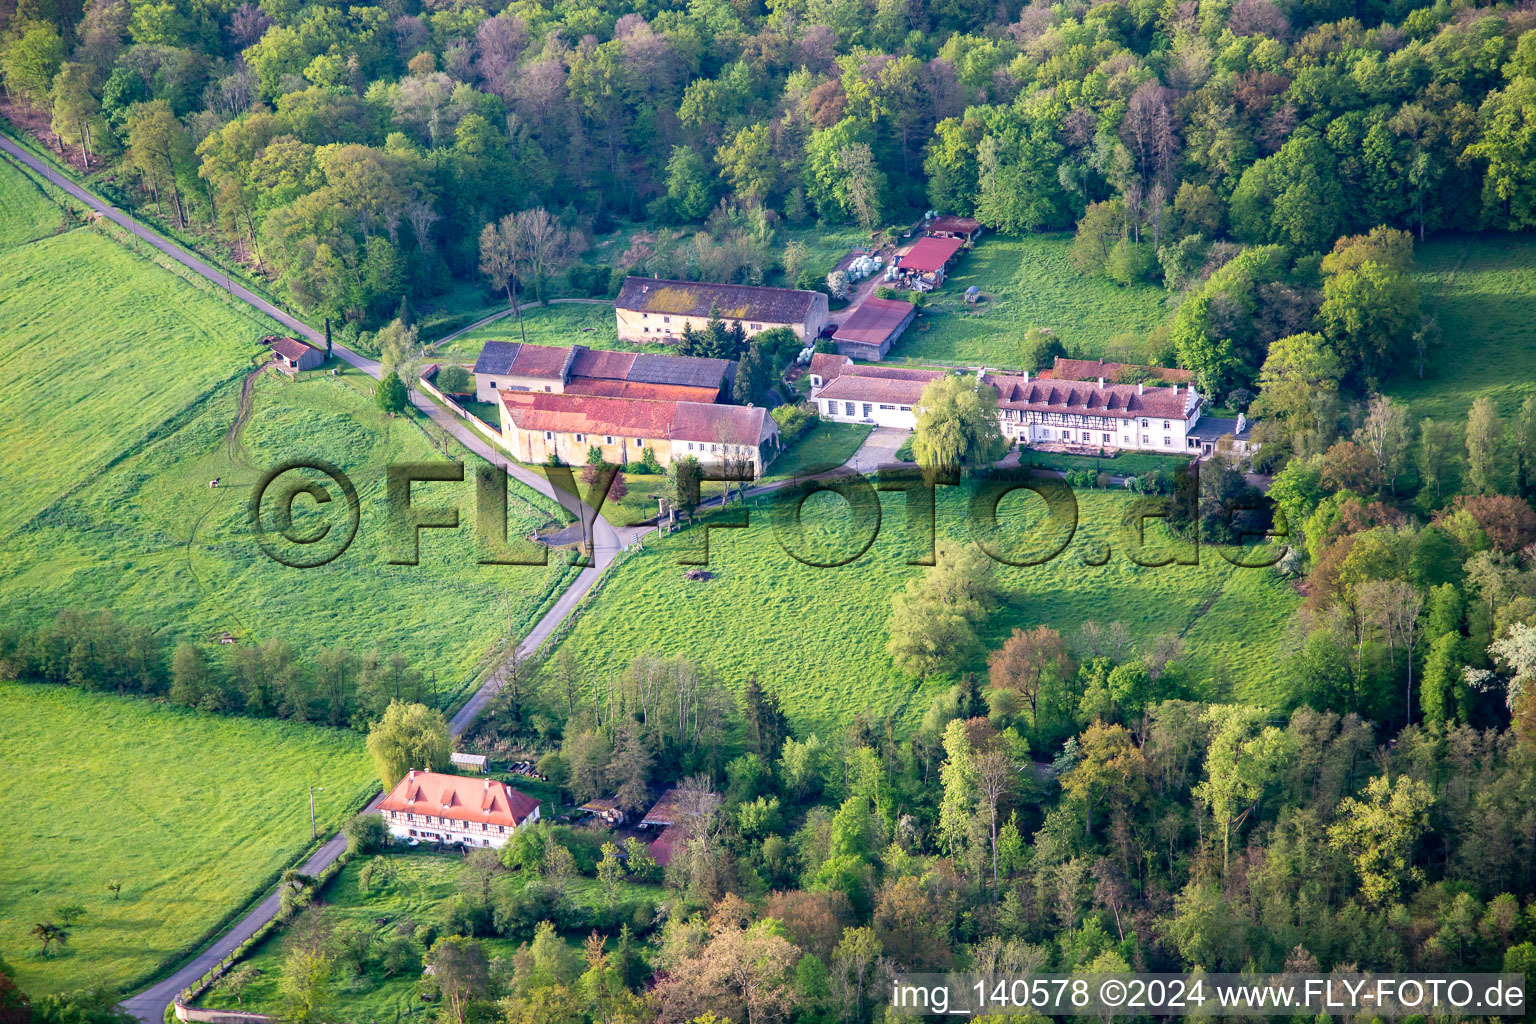 Aerial view of Chateau Bonnefontaine in Altwiller in the state Bas-Rhin, France